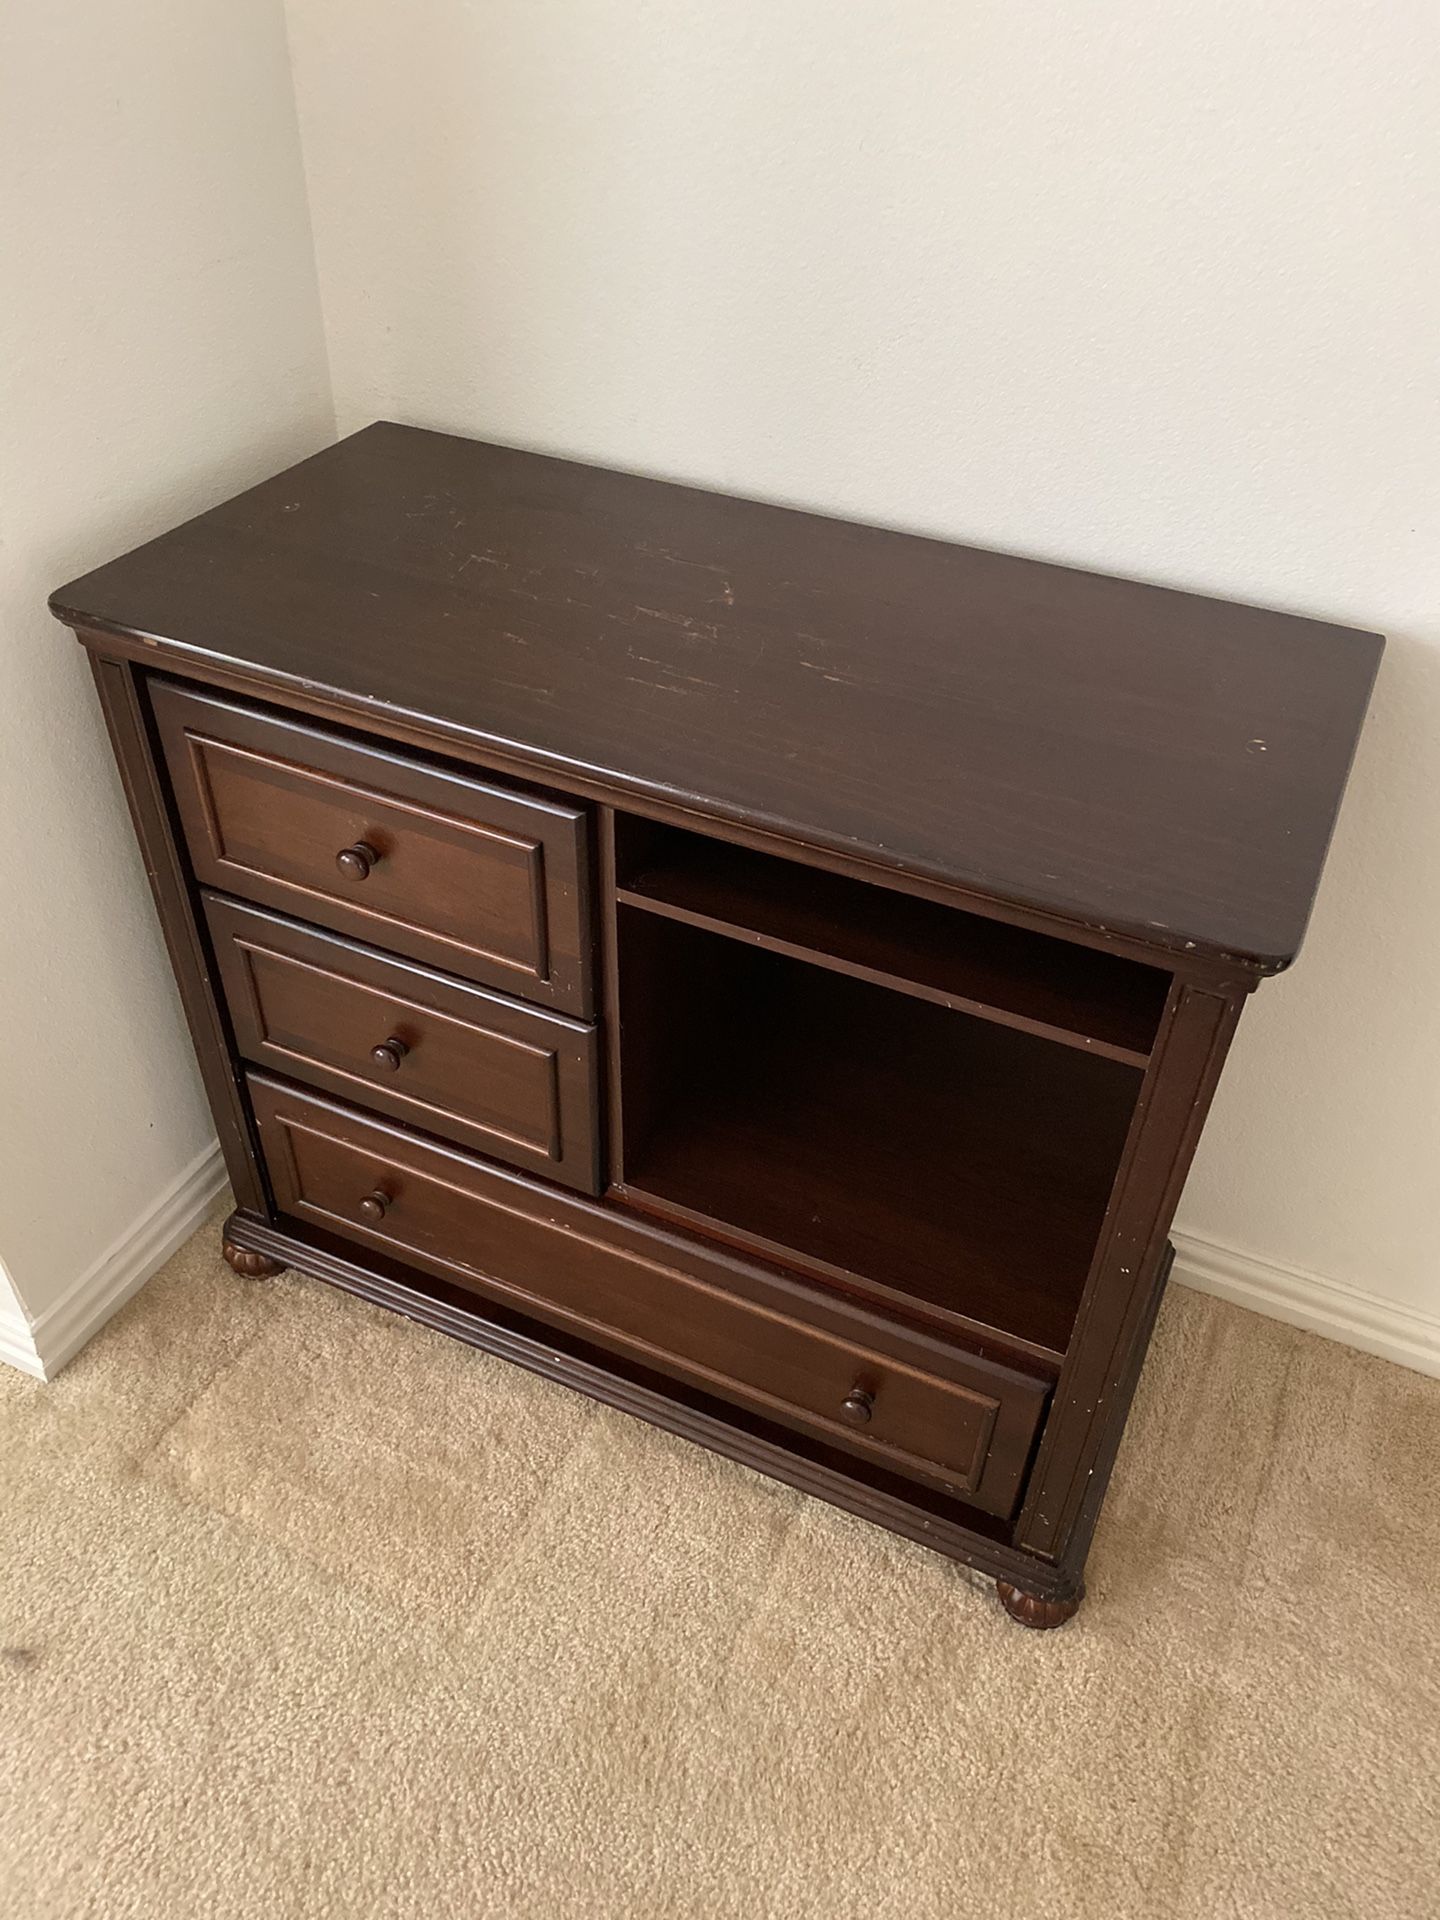 Baby dresser/changing table